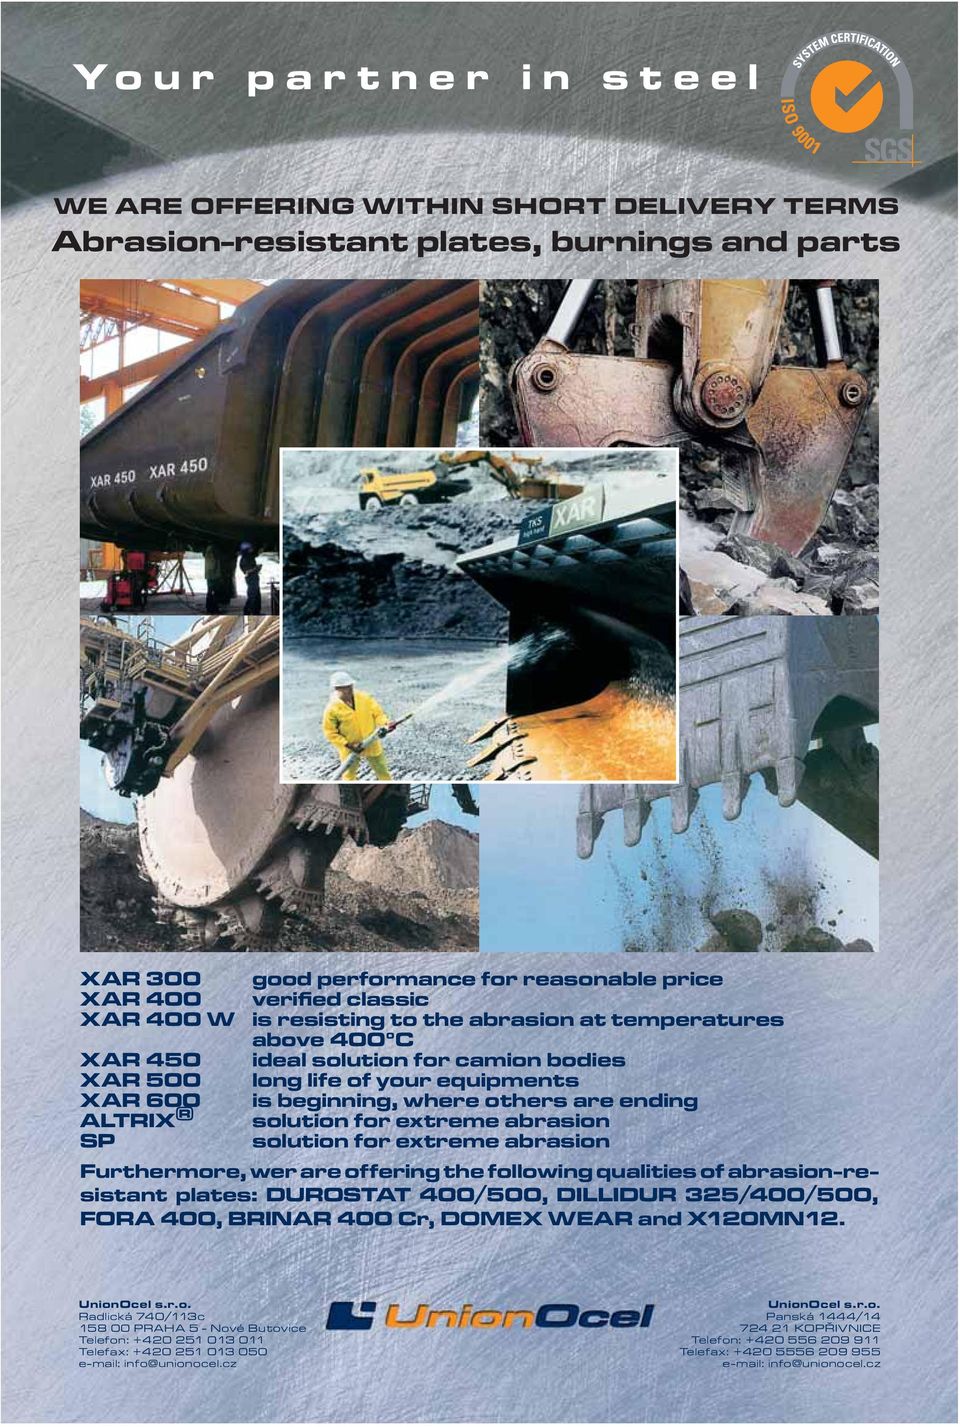 extreme abrasion SP solution for extreme abrasion Furthermore, wer are offering the following qualities of abrasion-resistant plates: DUROSTAT 400/500, DILLIDUR 325/400/500, FORA 400, BRINAR 400 Cr,